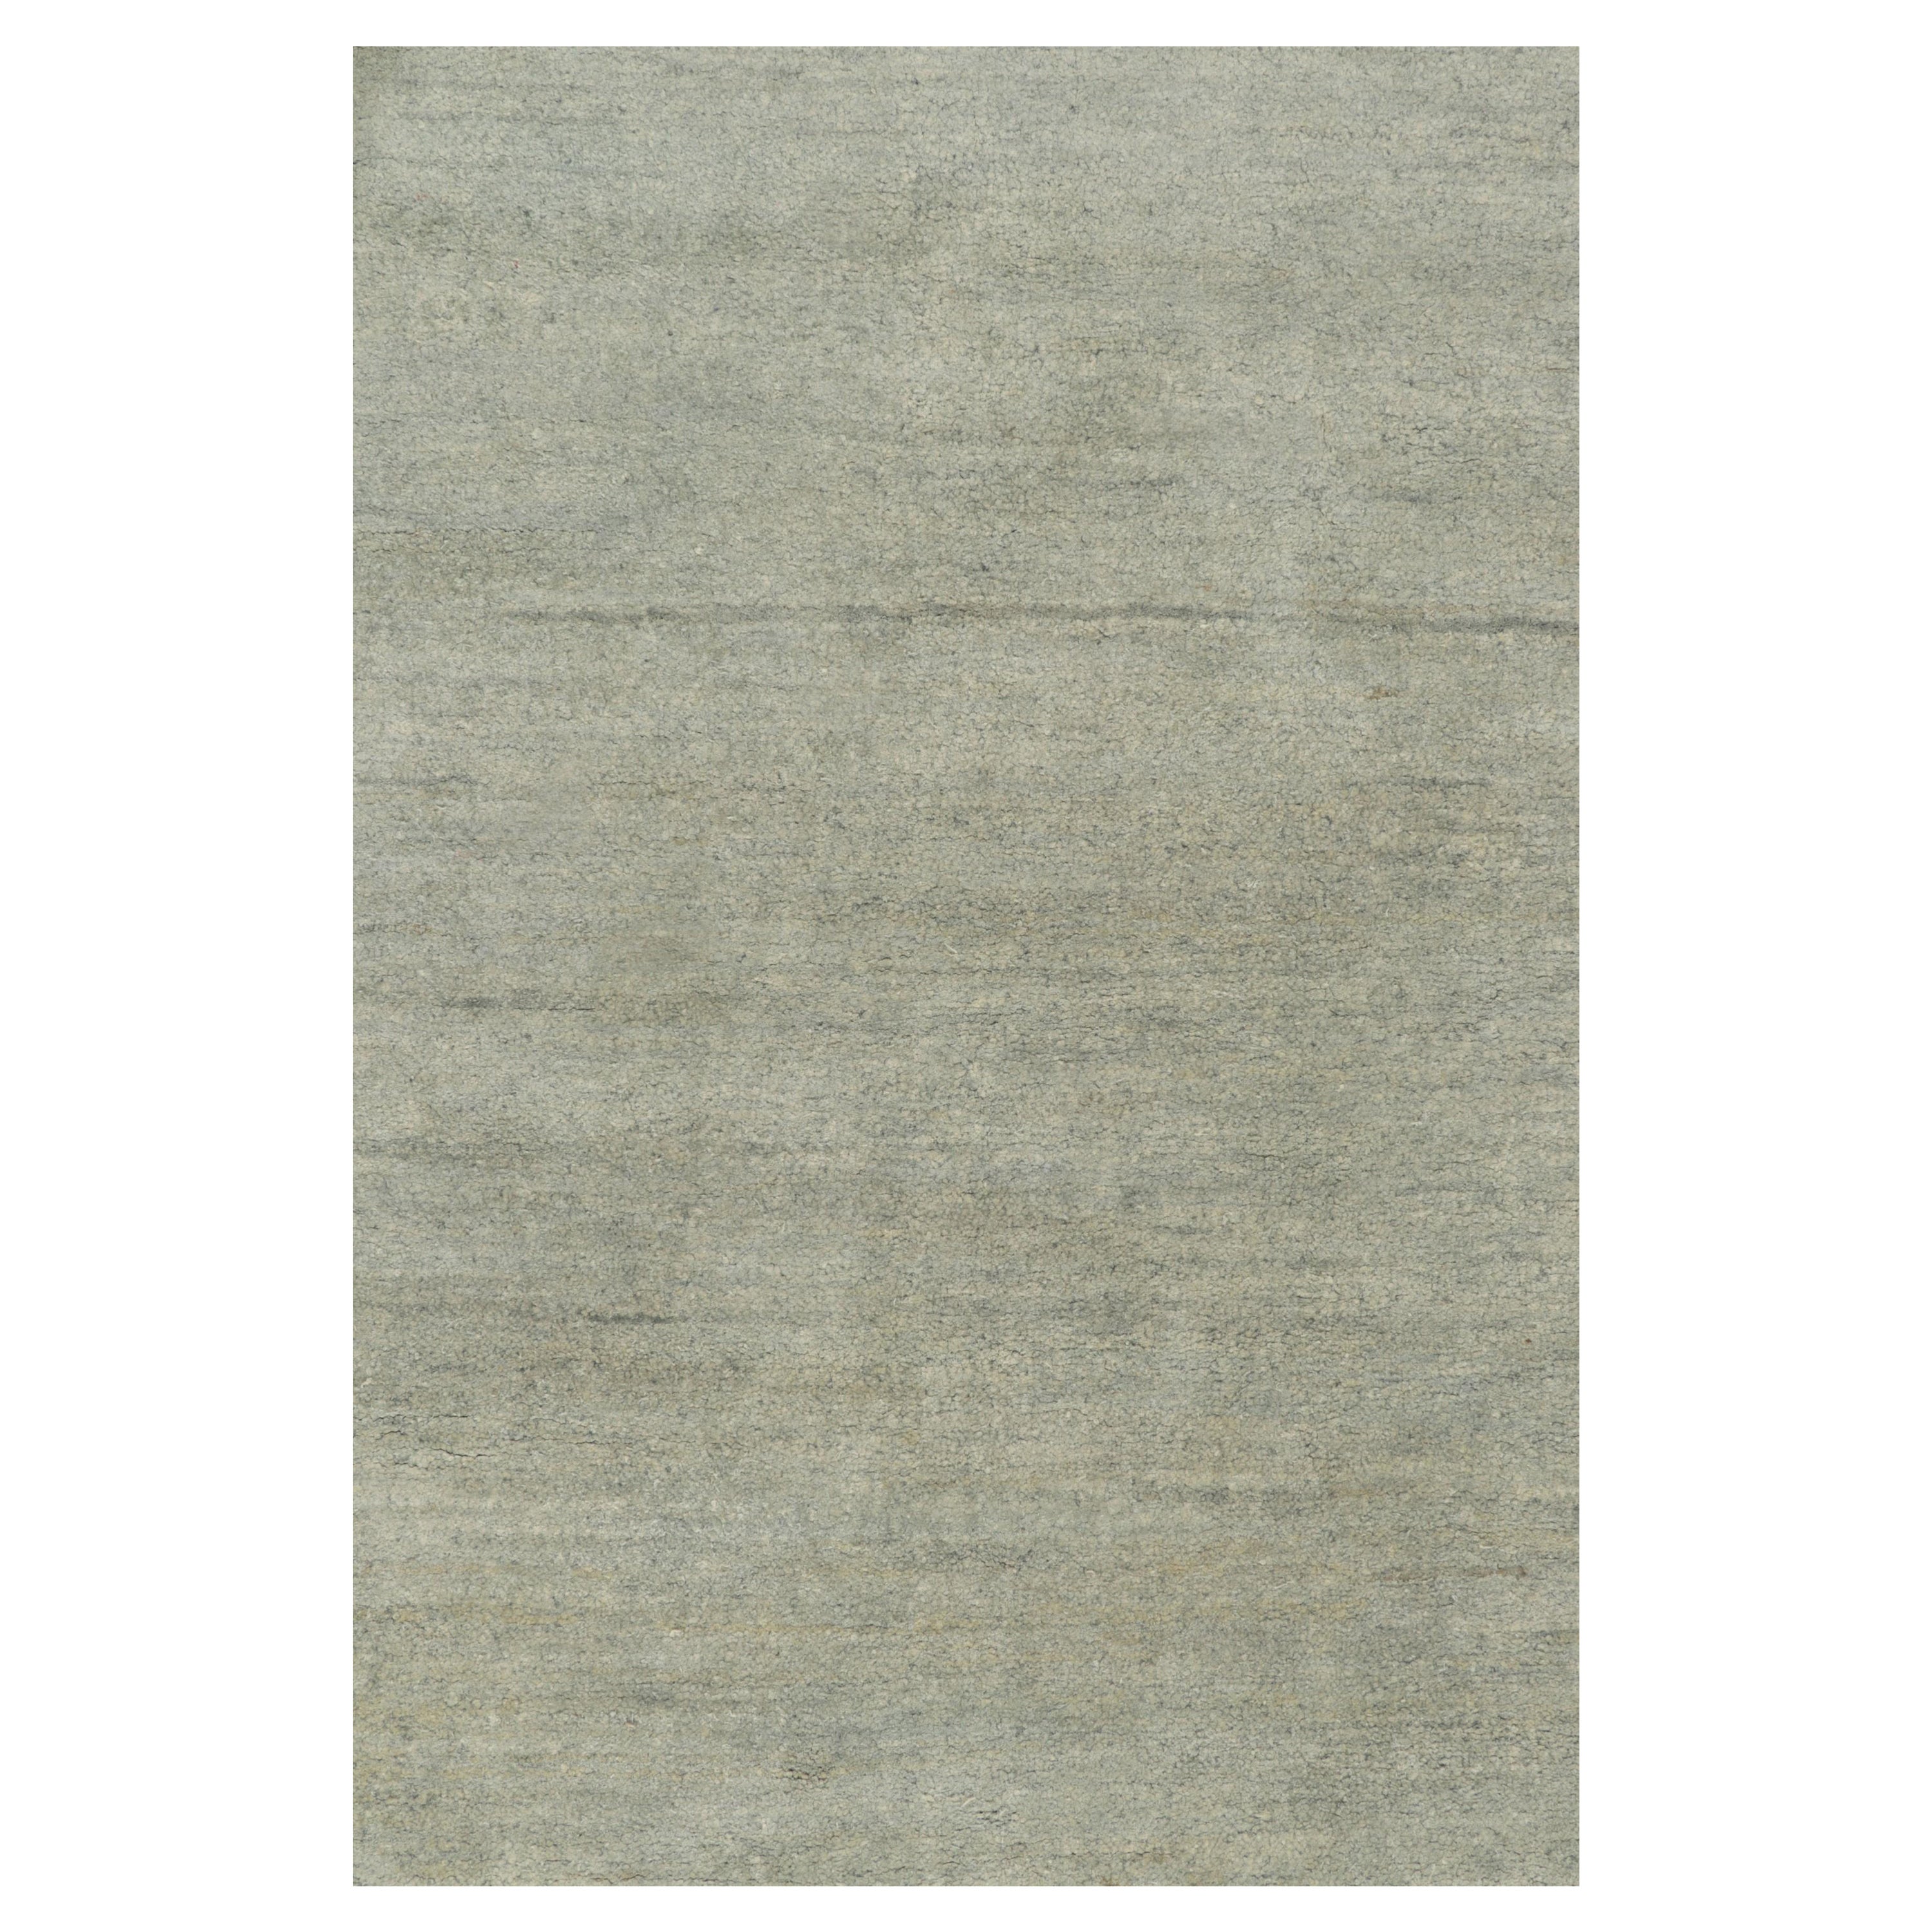 Hand knotted in a fine blend of wool & silk, a scintillating 8x10 design from Rug & Kilim’s Texture of Color Collection. A delicious blend of luxurious silver-gray and blue striae, accented by a subtle sheen naturally complimenting the textural